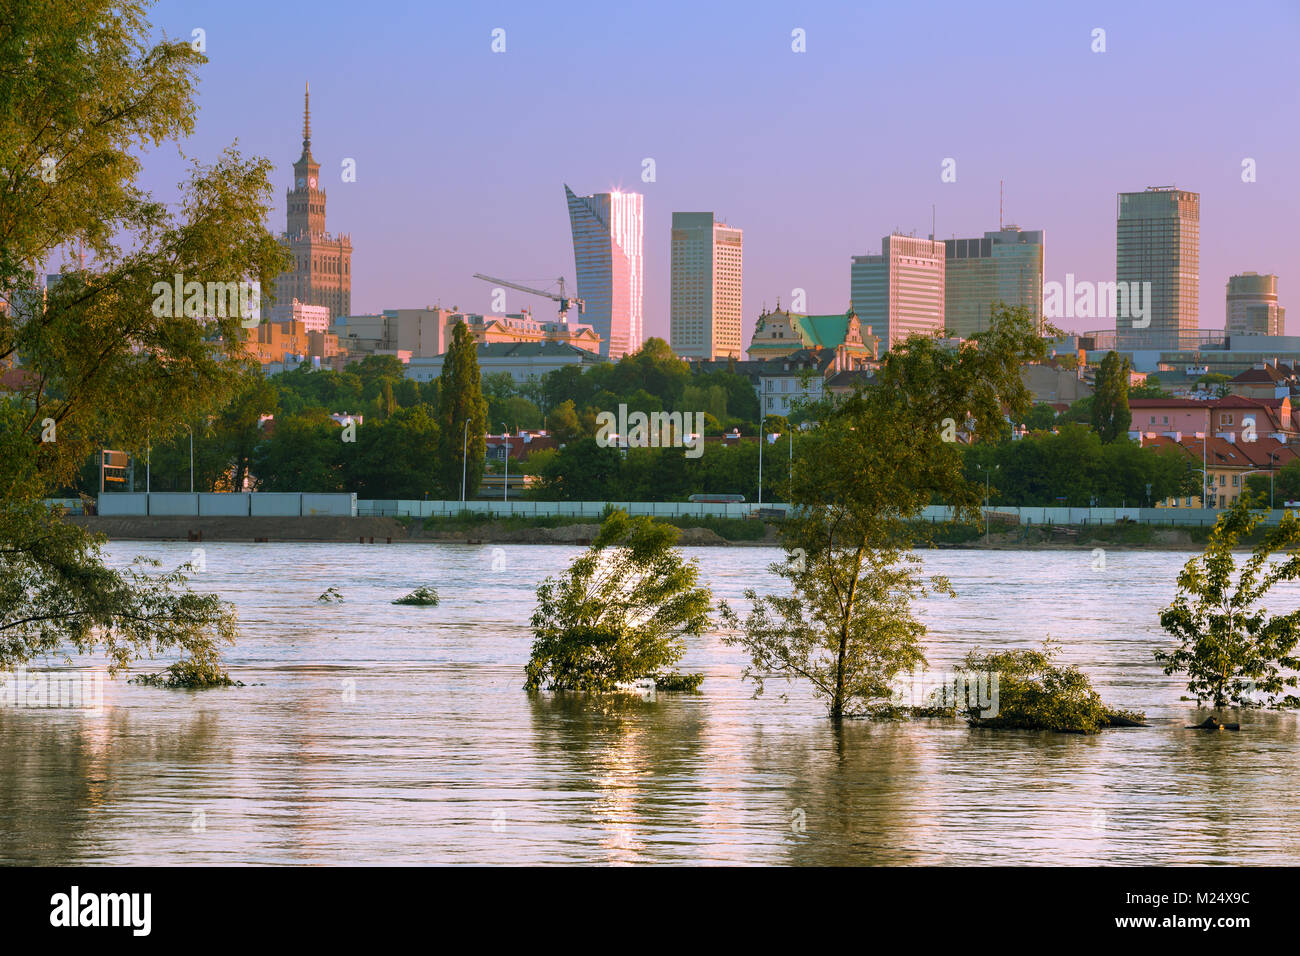 A view of the center of Warsaw during high water level Stock Photo